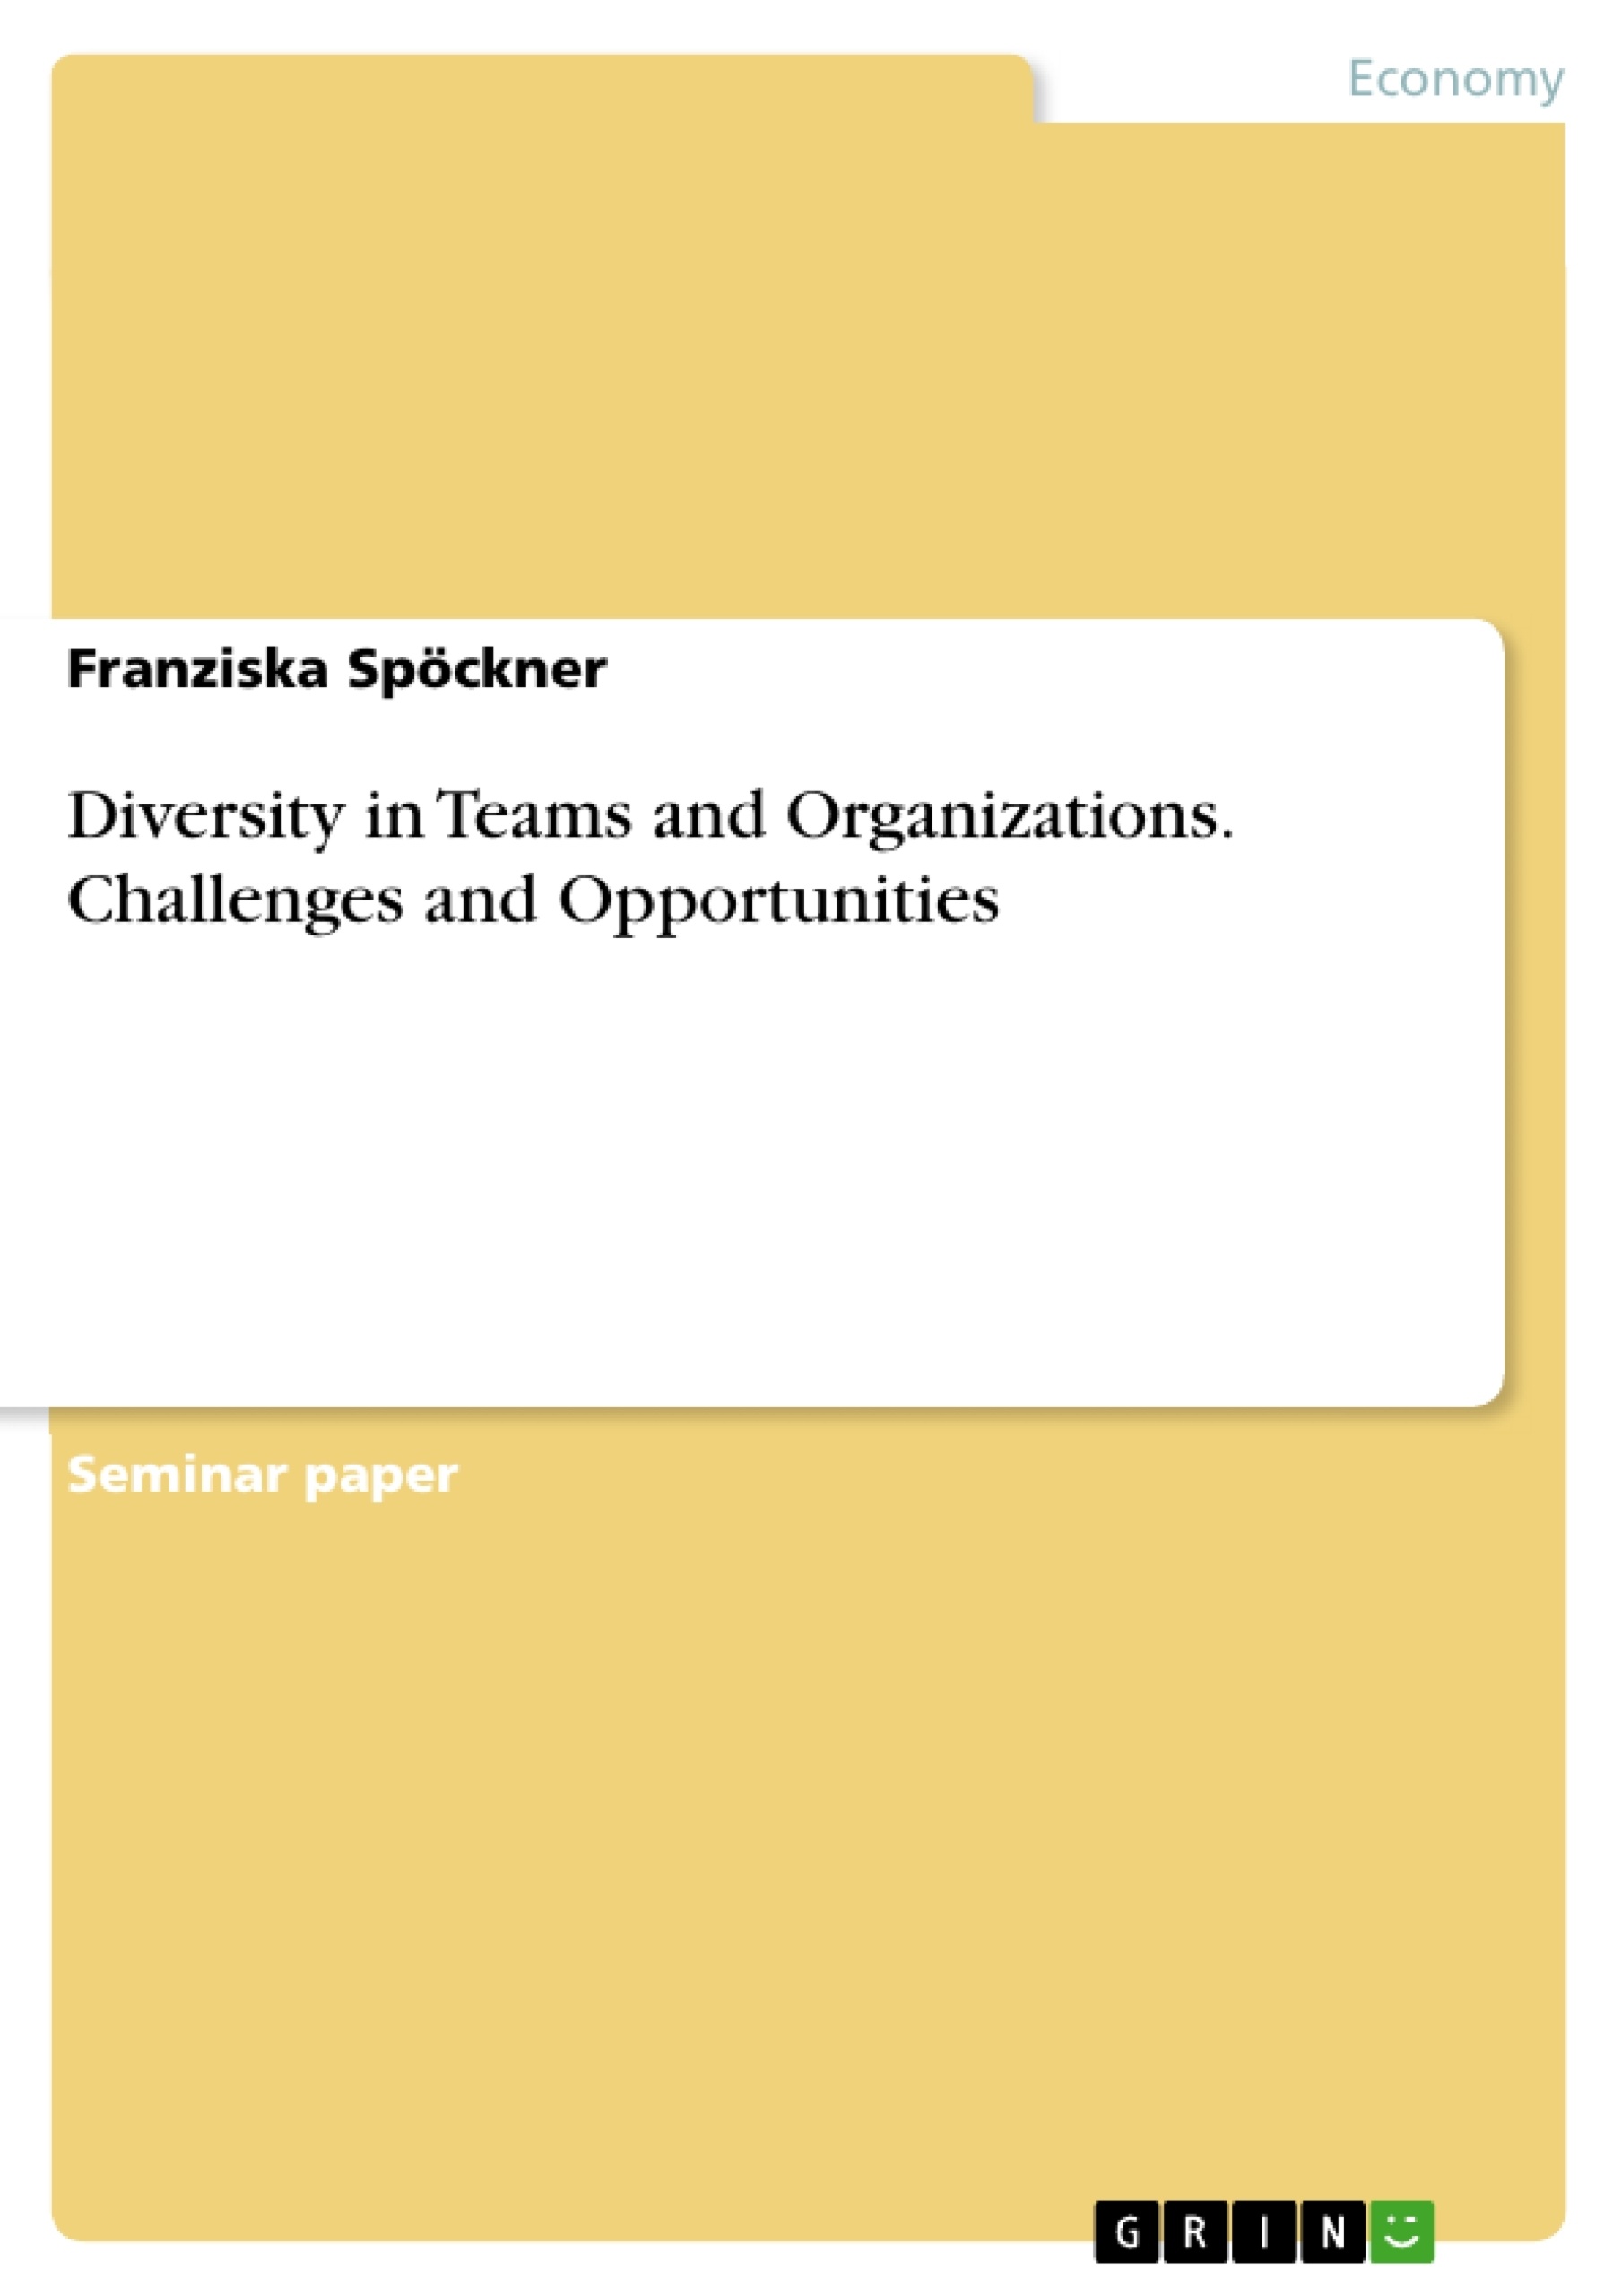 Title: Diversity in Teams and Organizations. Challenges and Opportunities